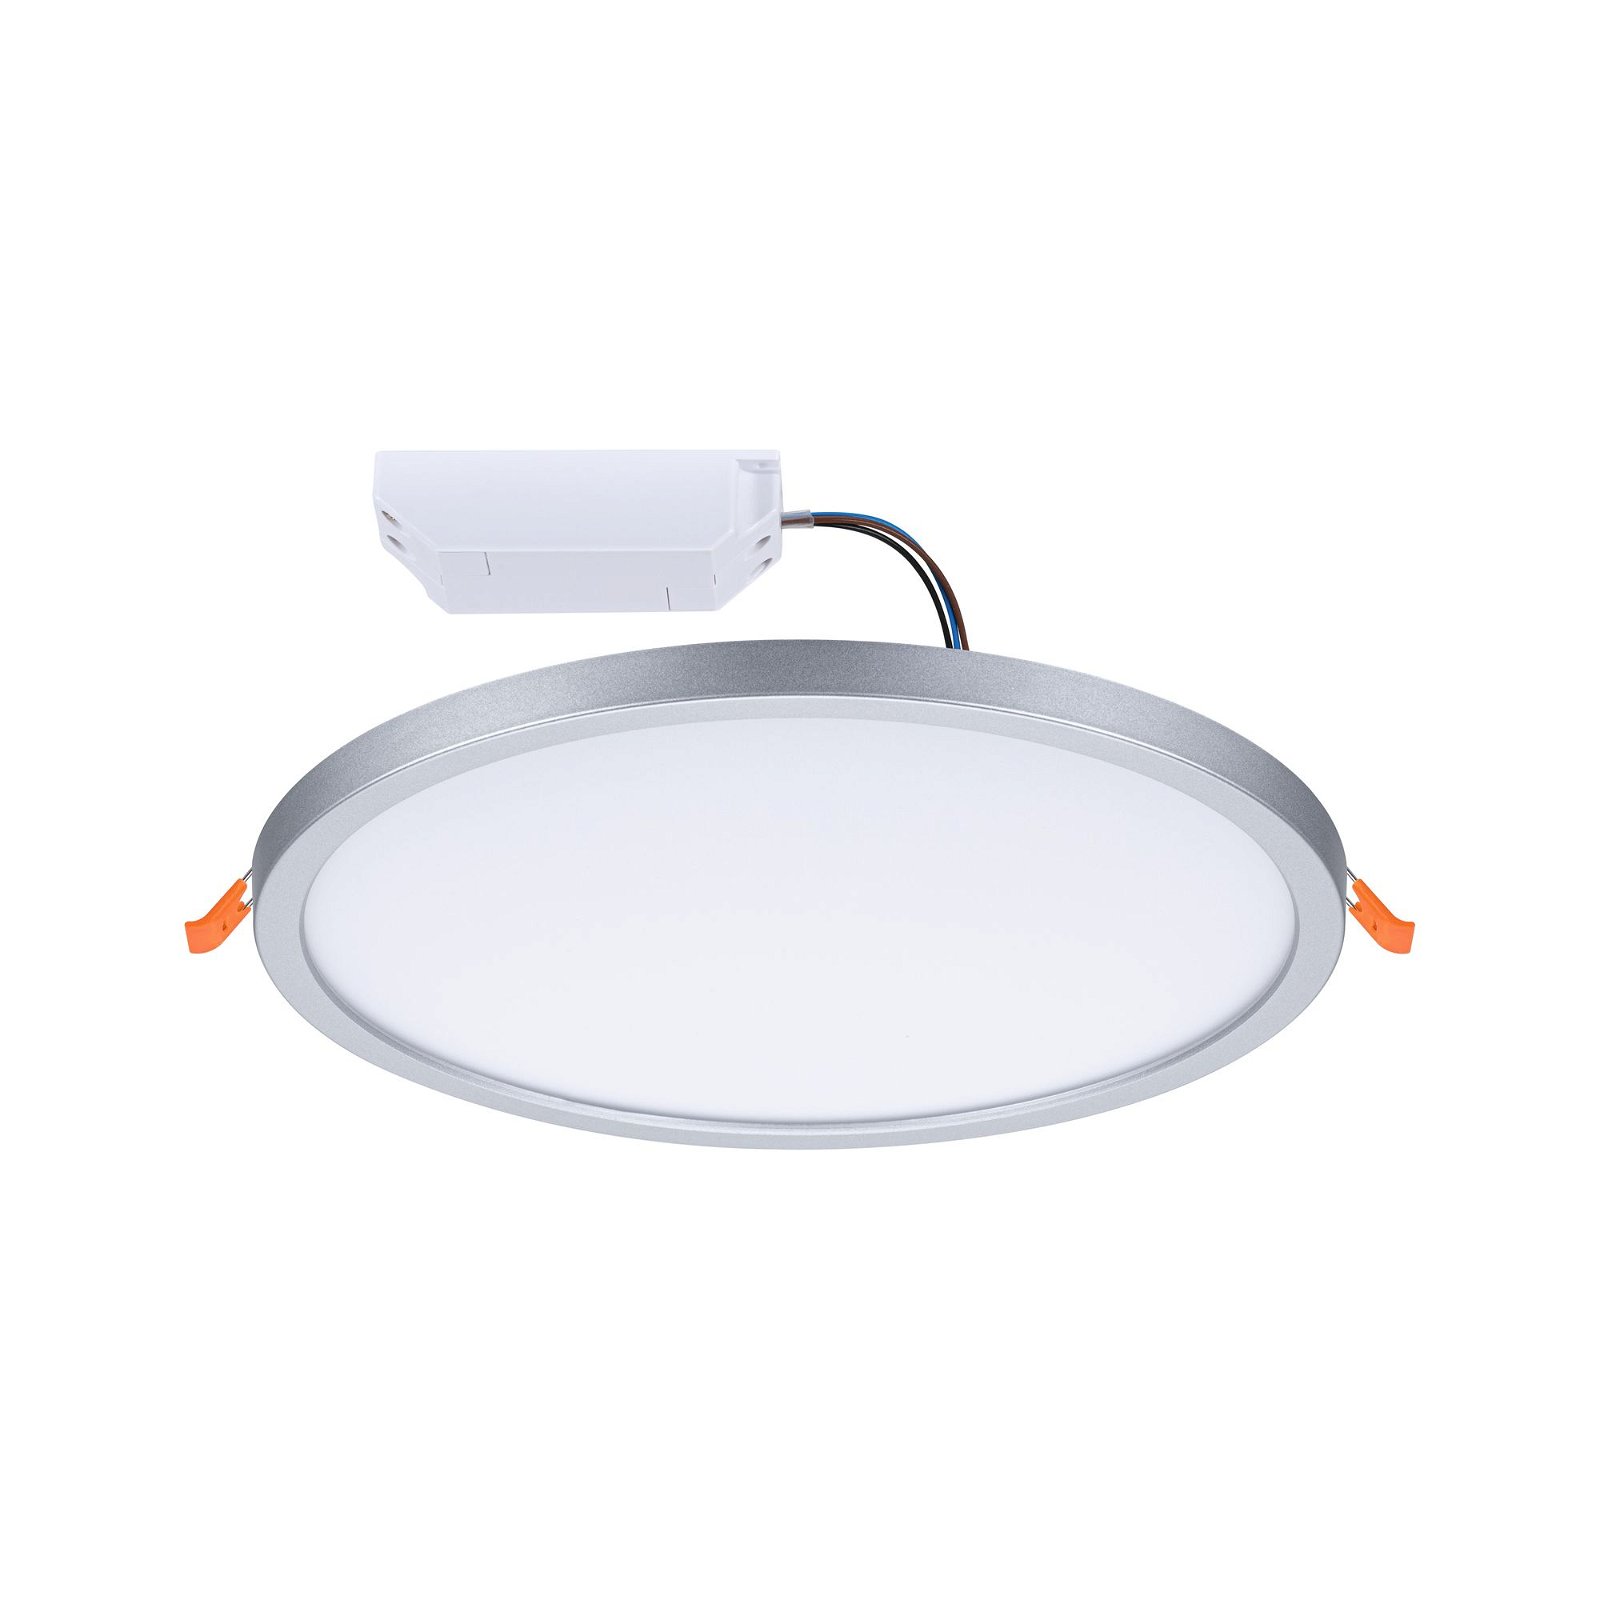 VariFit LED Recessed panel Dim to Warm Areo IP44 round 230mm 16W 1400lm 3 Step Dim to warm Chrome matt dimmable